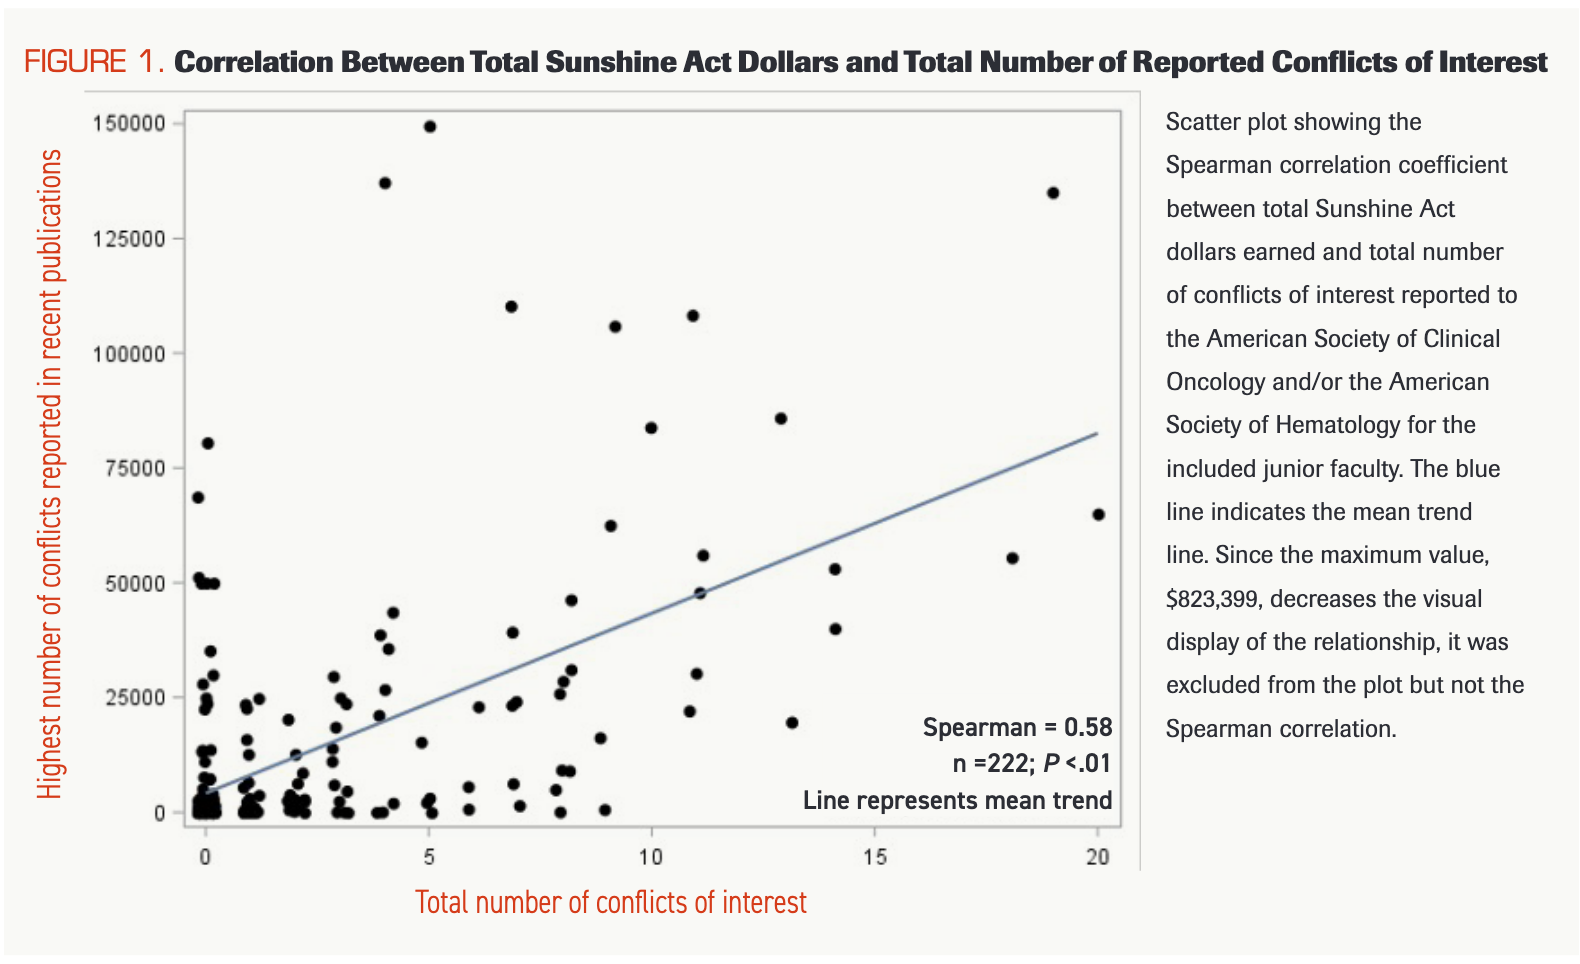 FIGURE 1. Correlation Between Total Sunshine Act Dollars and Total Number of Reported Conflict of Interests